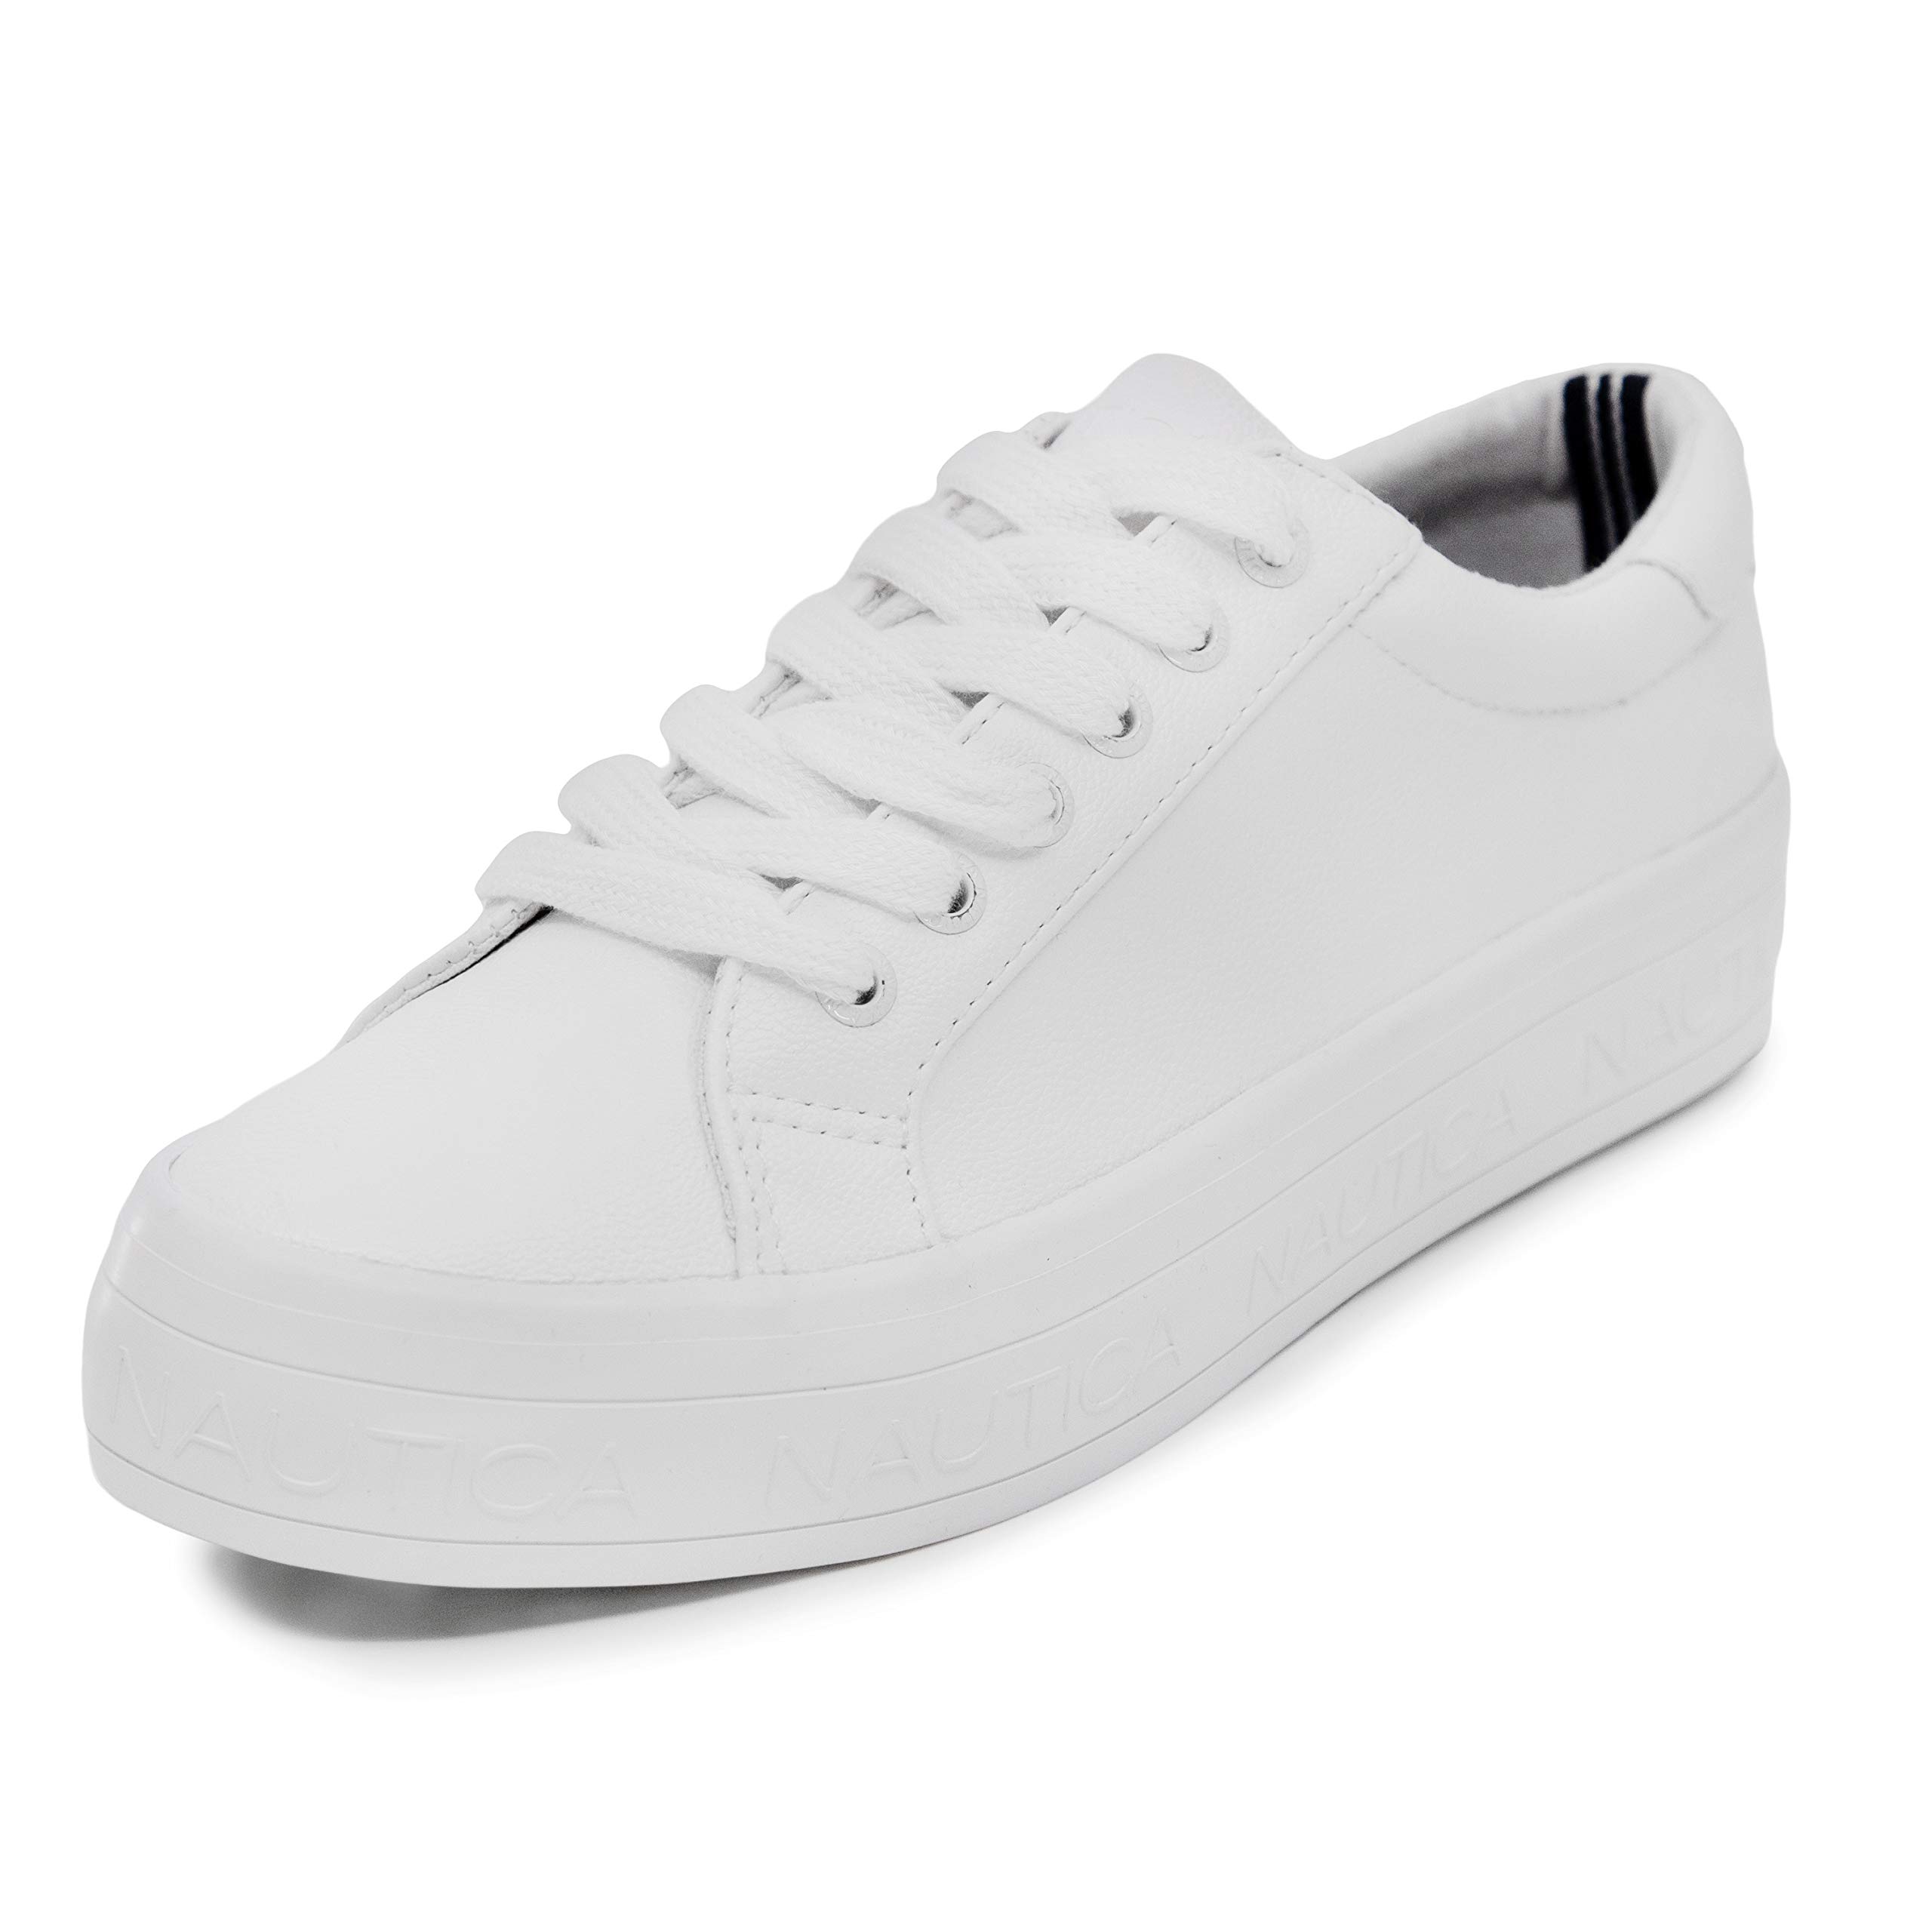 Nautica Women Fashion Sneaker Casual Shoes -Steam (Lace-Up/Slip On)